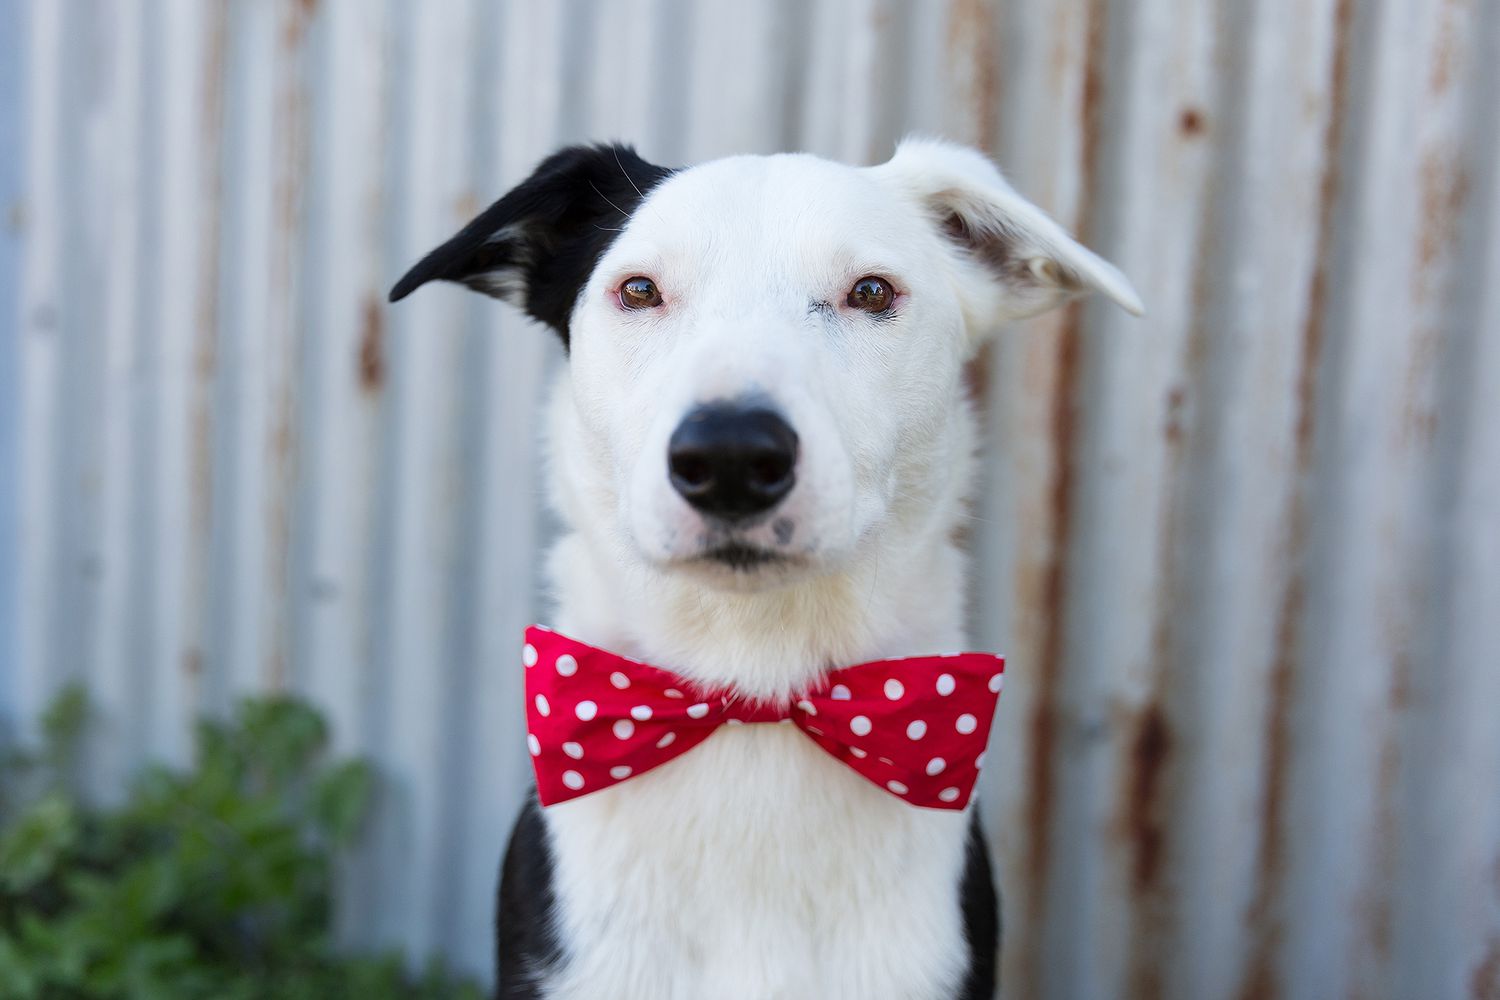 Dogs in Bowties Photos | PEOPLE.com